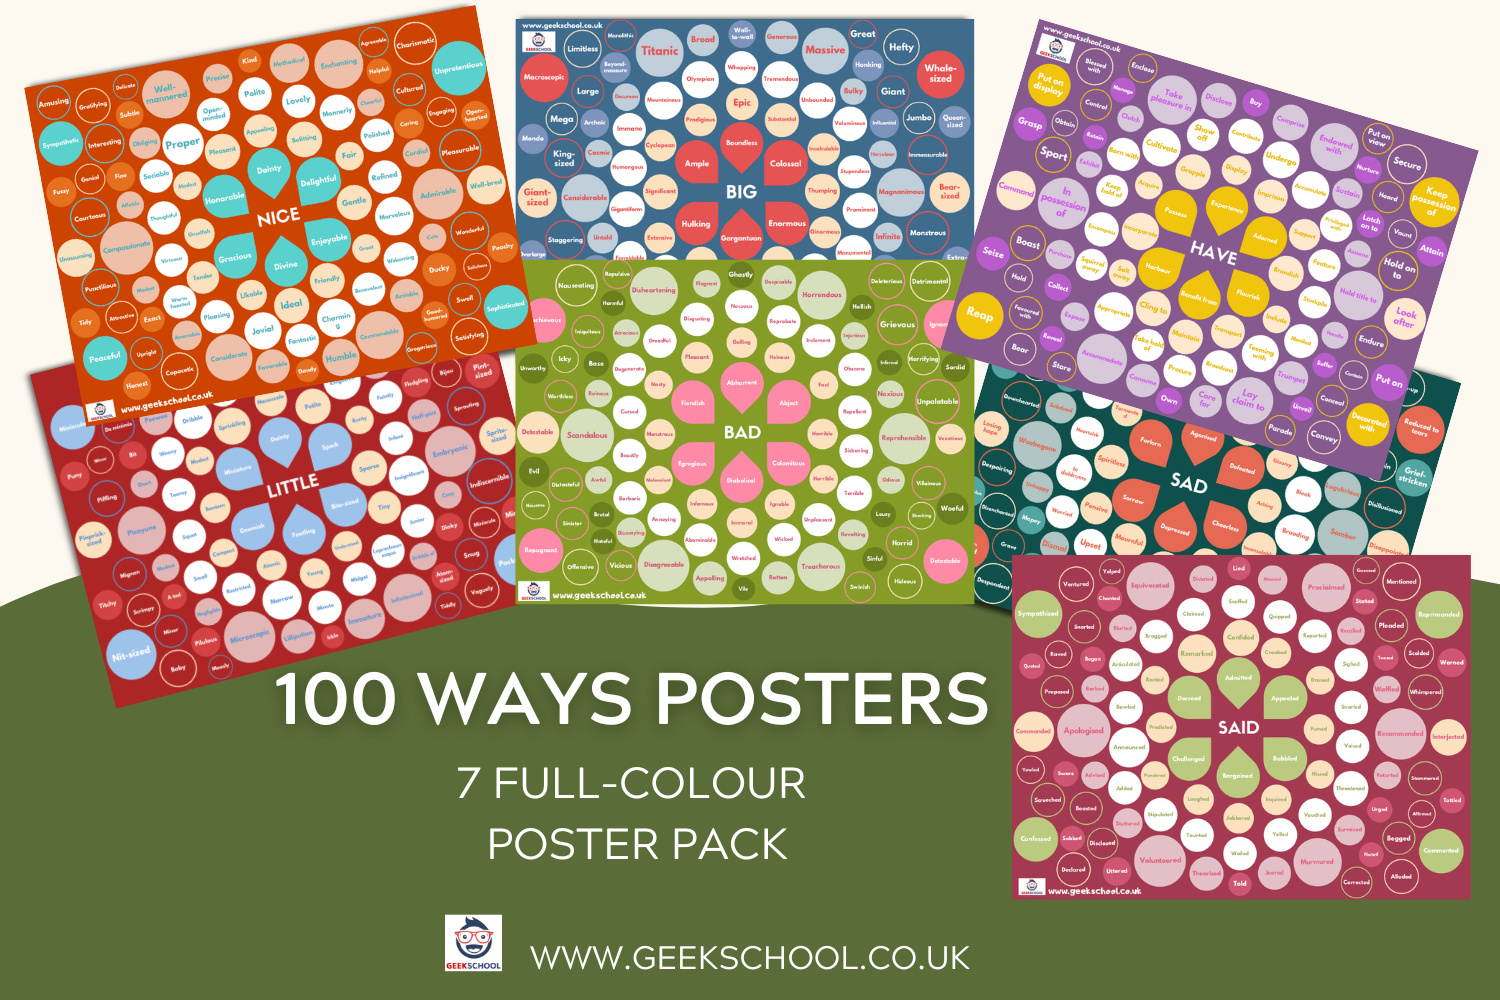 100 ways to poster pack mockup